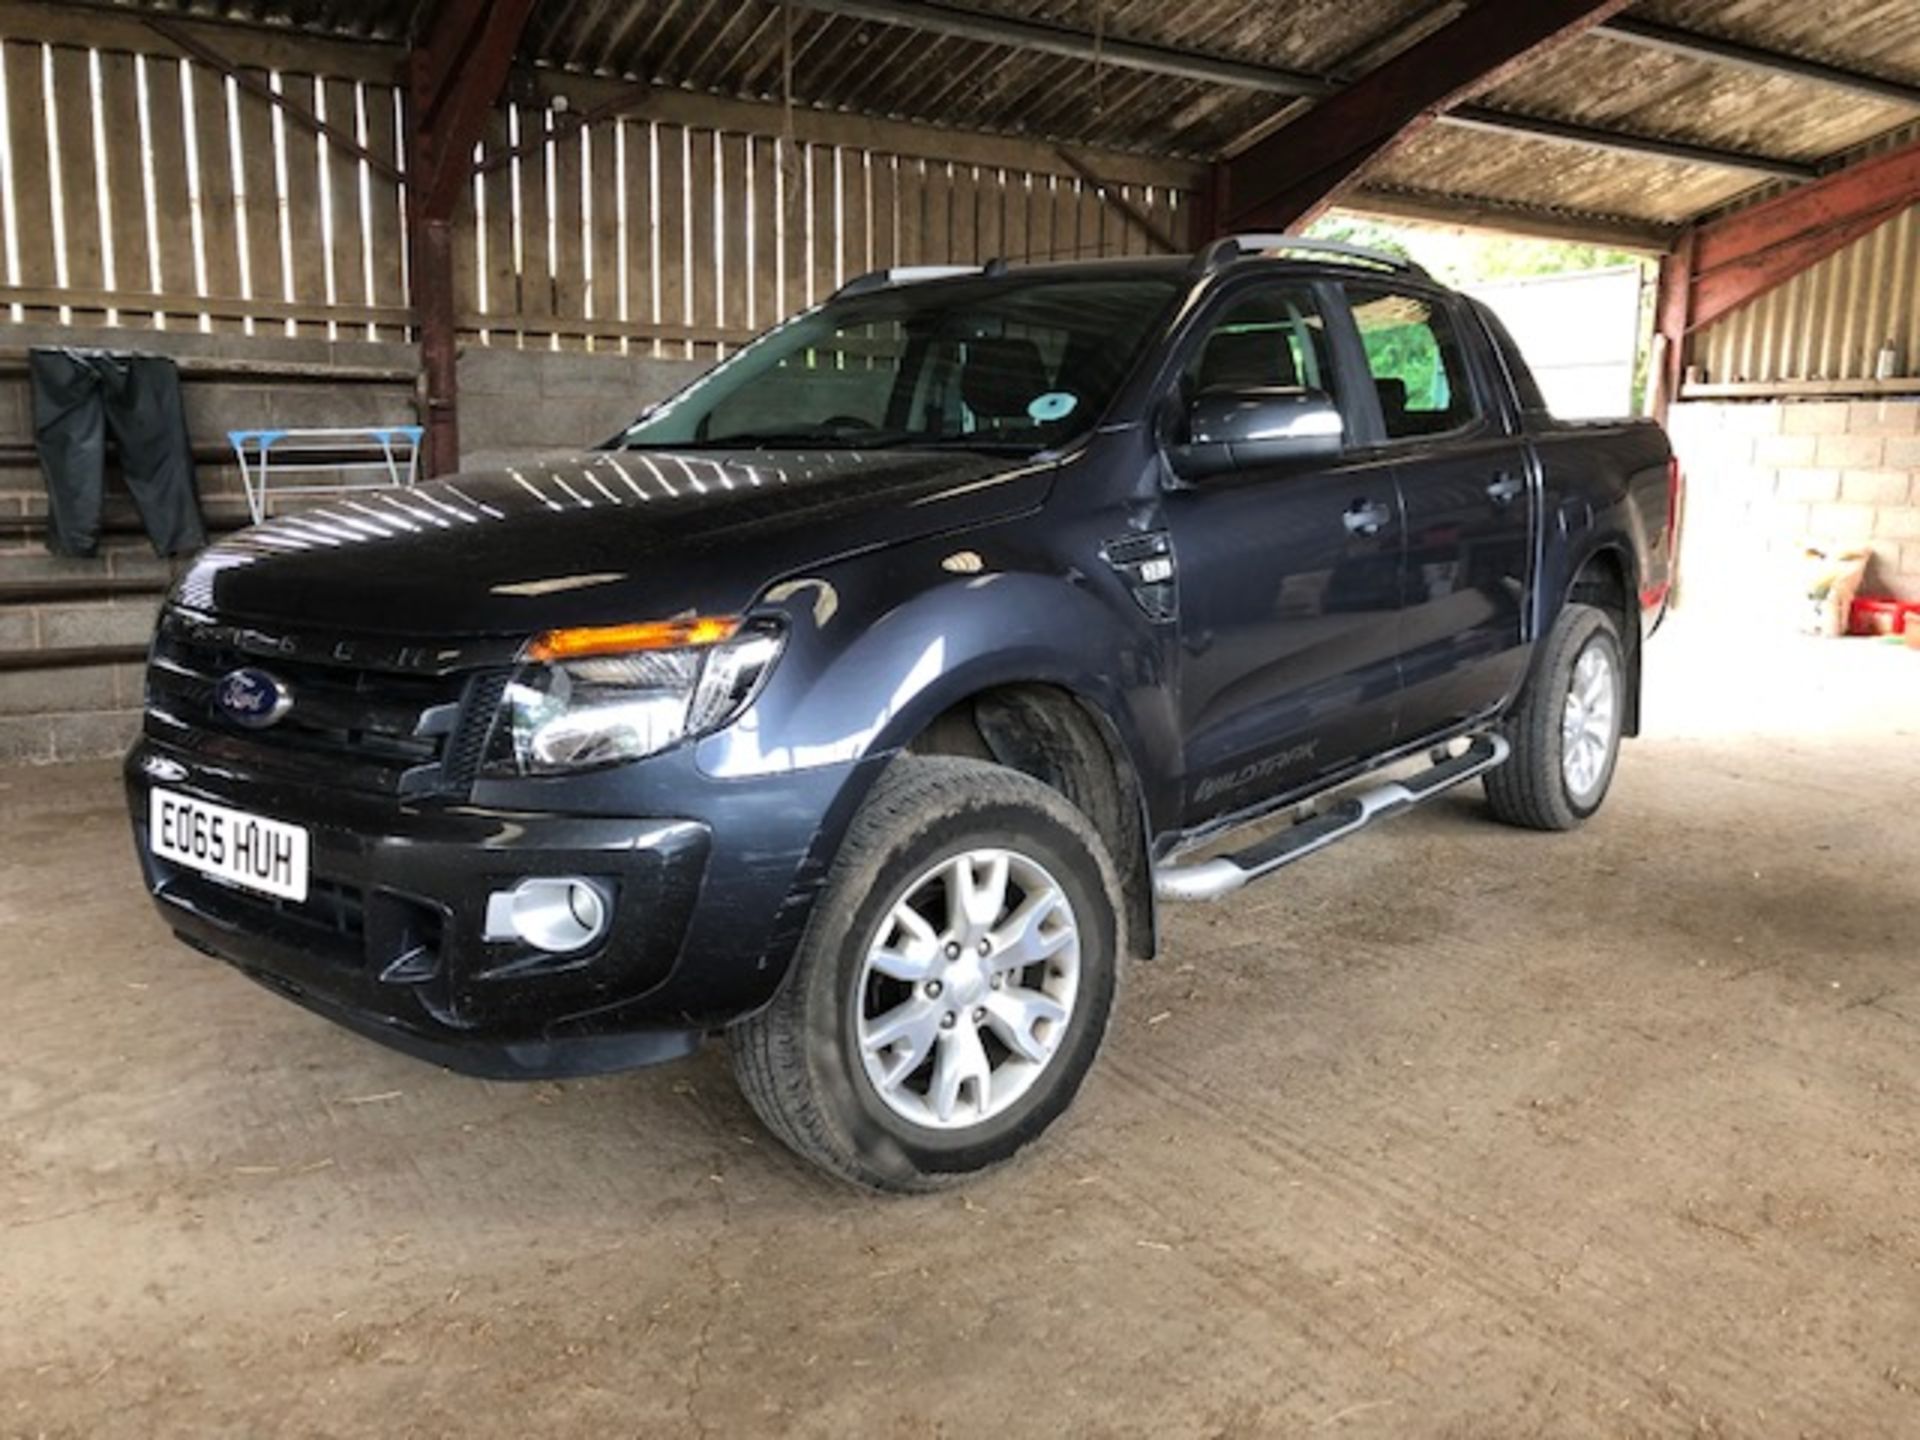 FORD RANGER "WILDCAT"DOUBLE CAB PICK UP